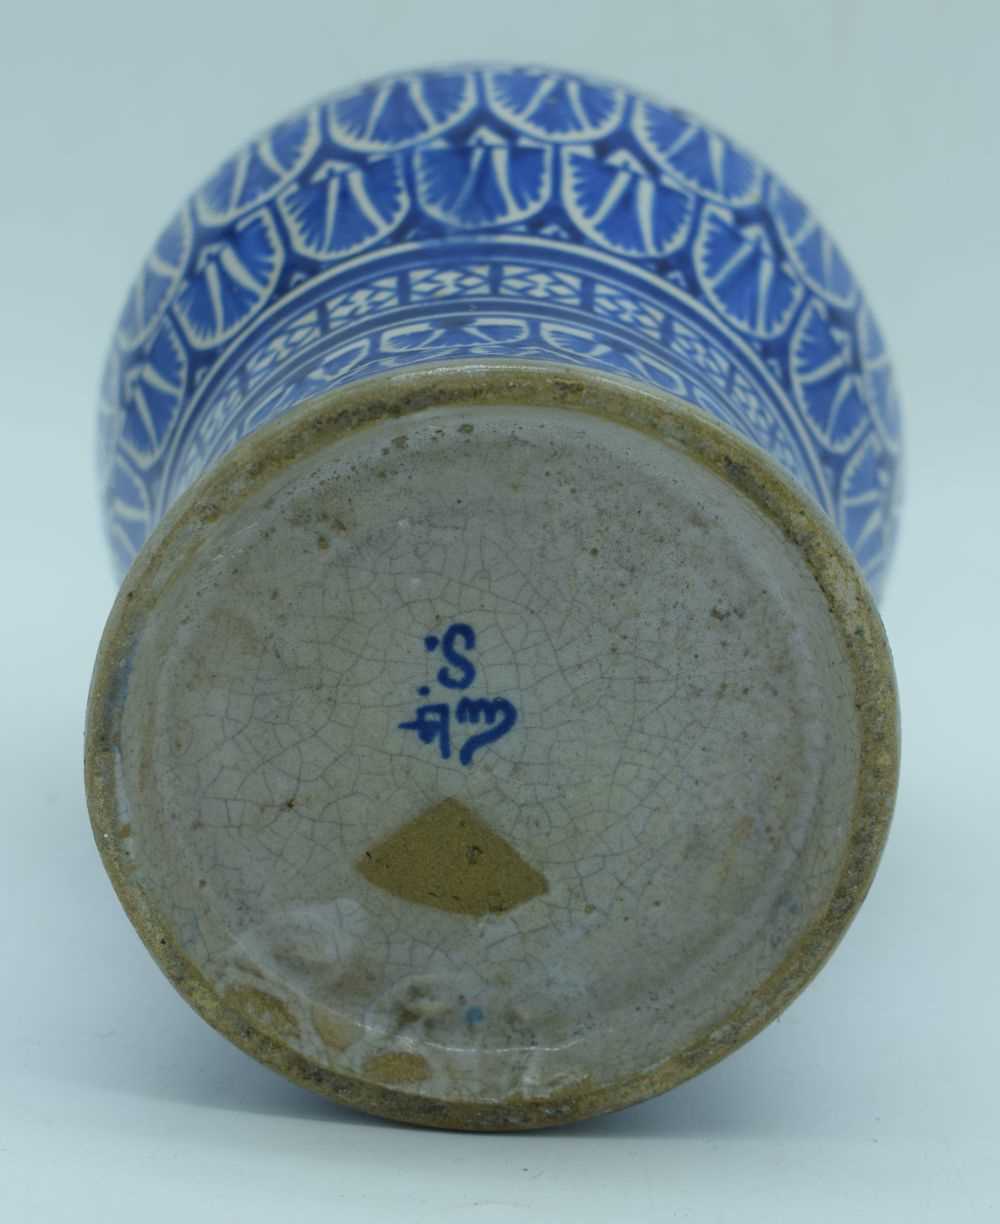 A North African glazed pottery vase 19 cm. - Image 4 of 6